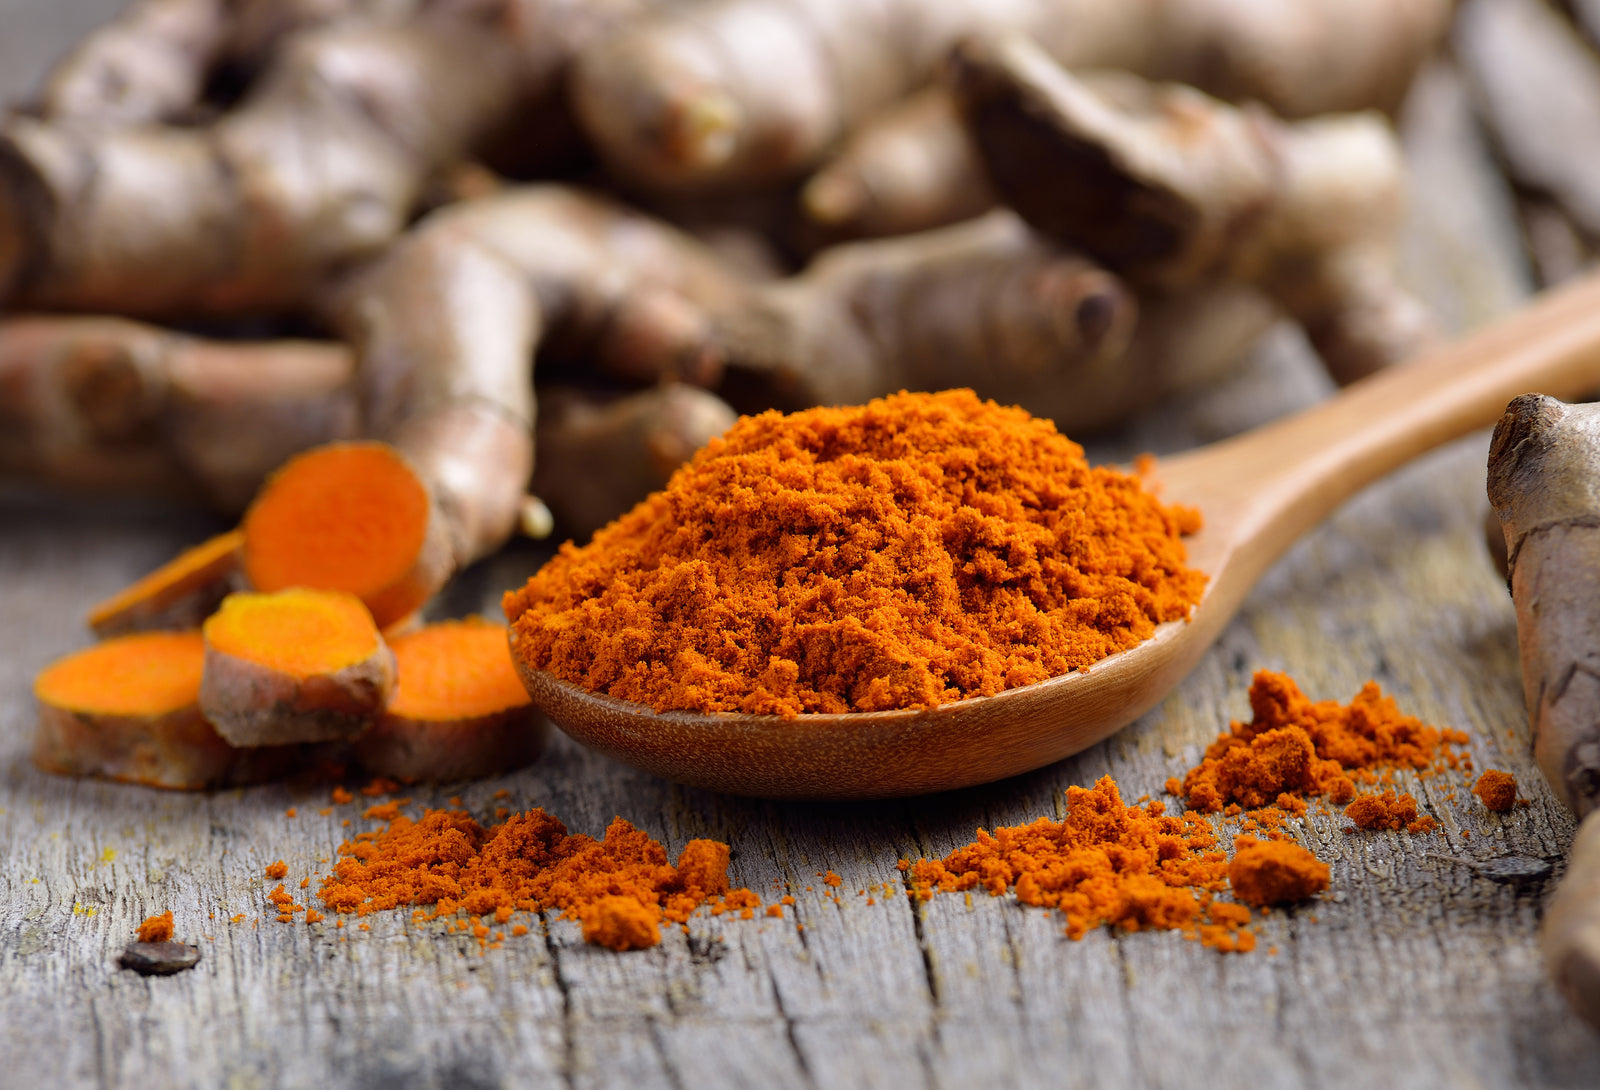 What Does Turmeric Do?